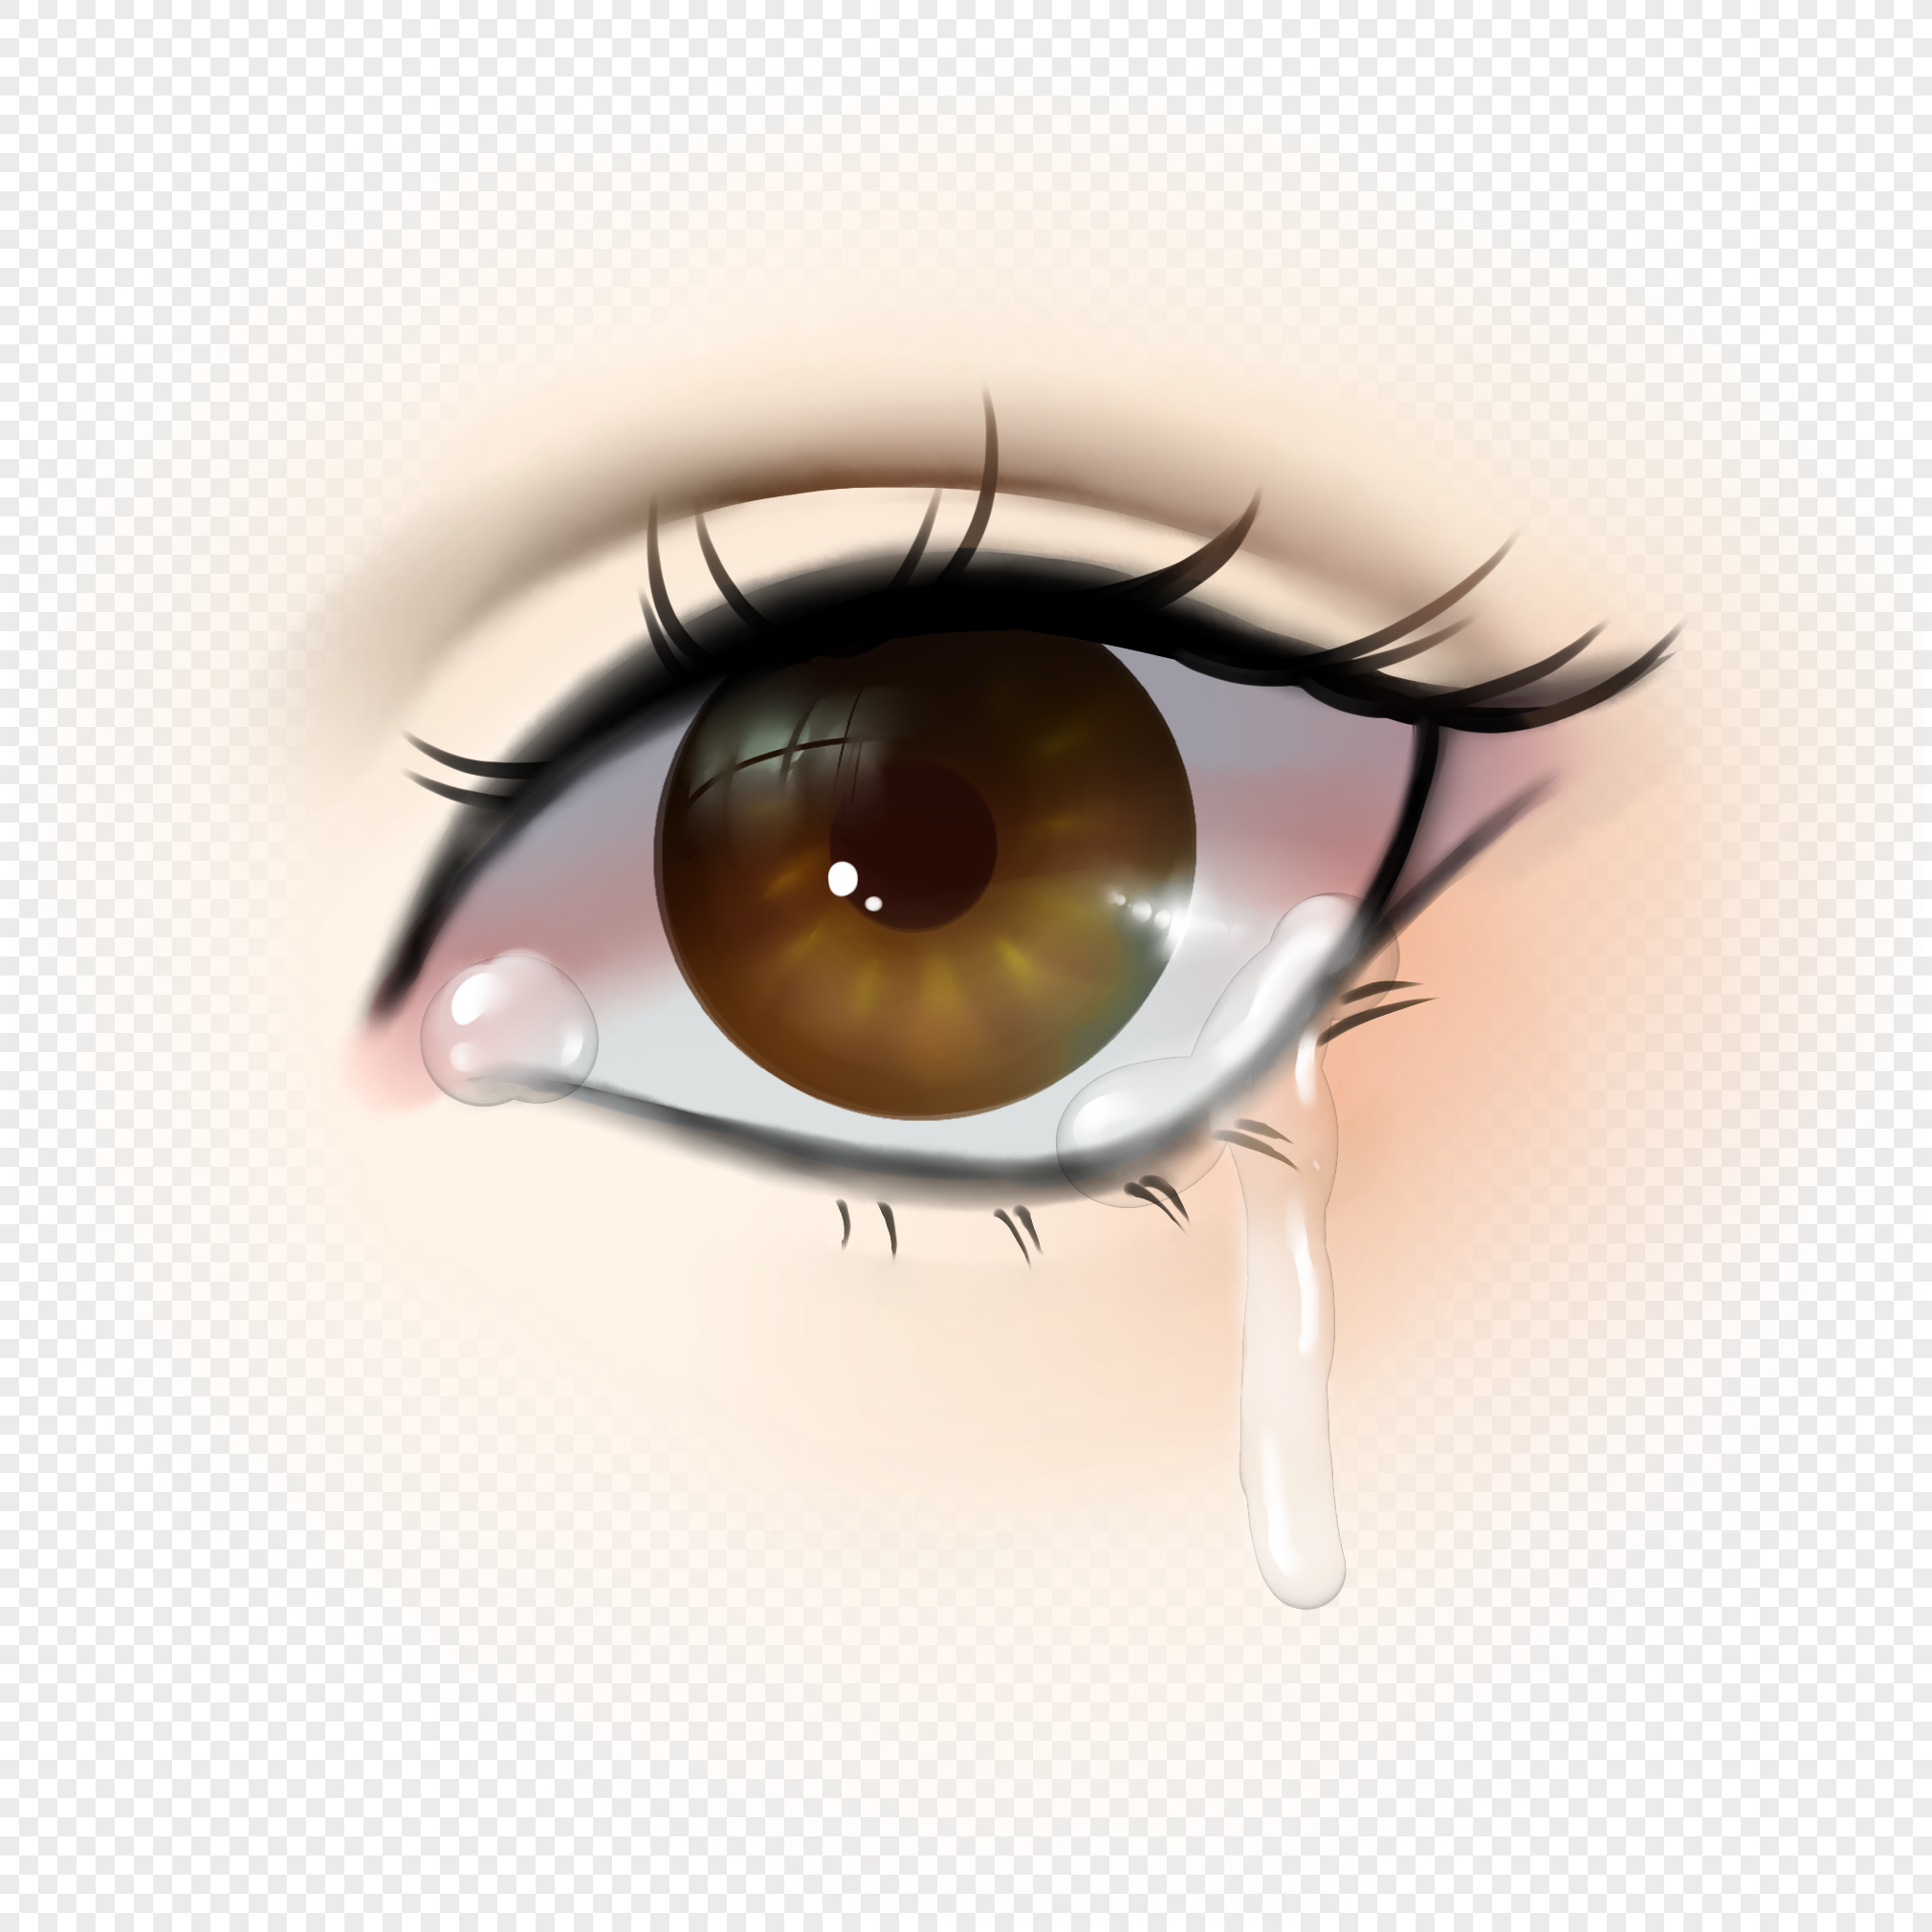 How to Draw Eyes with Tears Easy to Learn Step by Step - YouTube